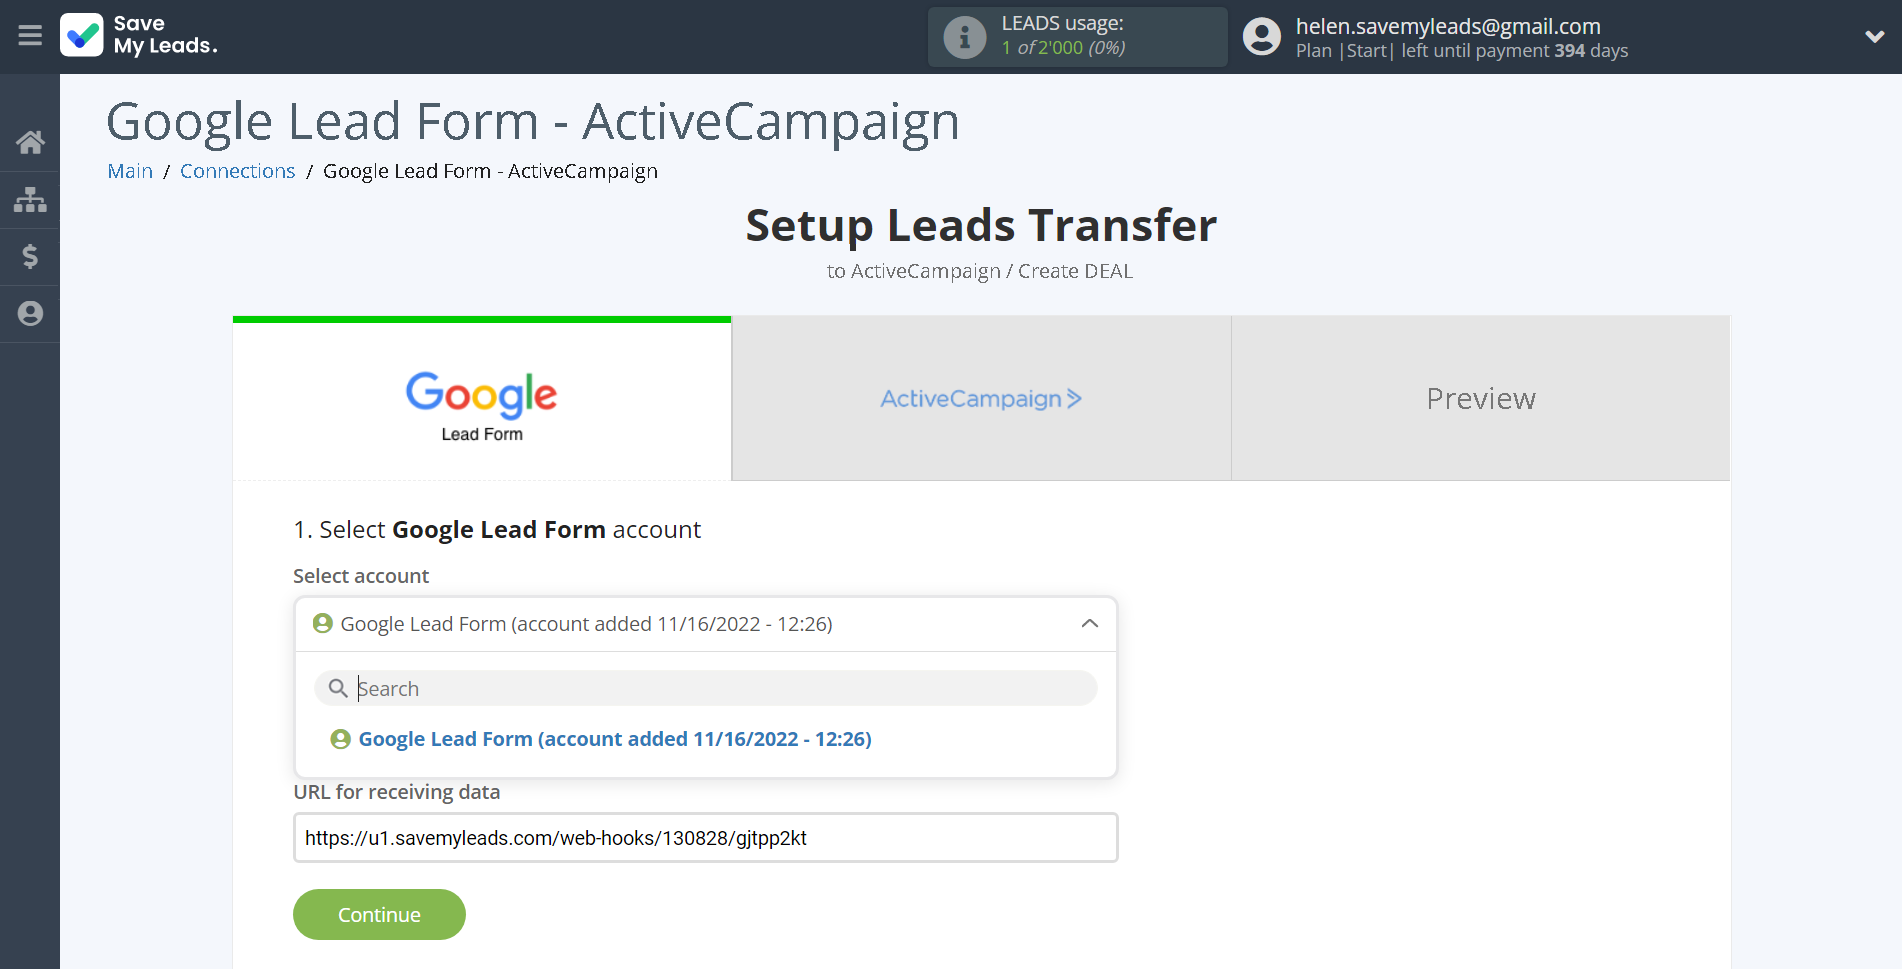 How to Connect Google Lead Form with ActiveCampaign Create Deal | Data Source account selection